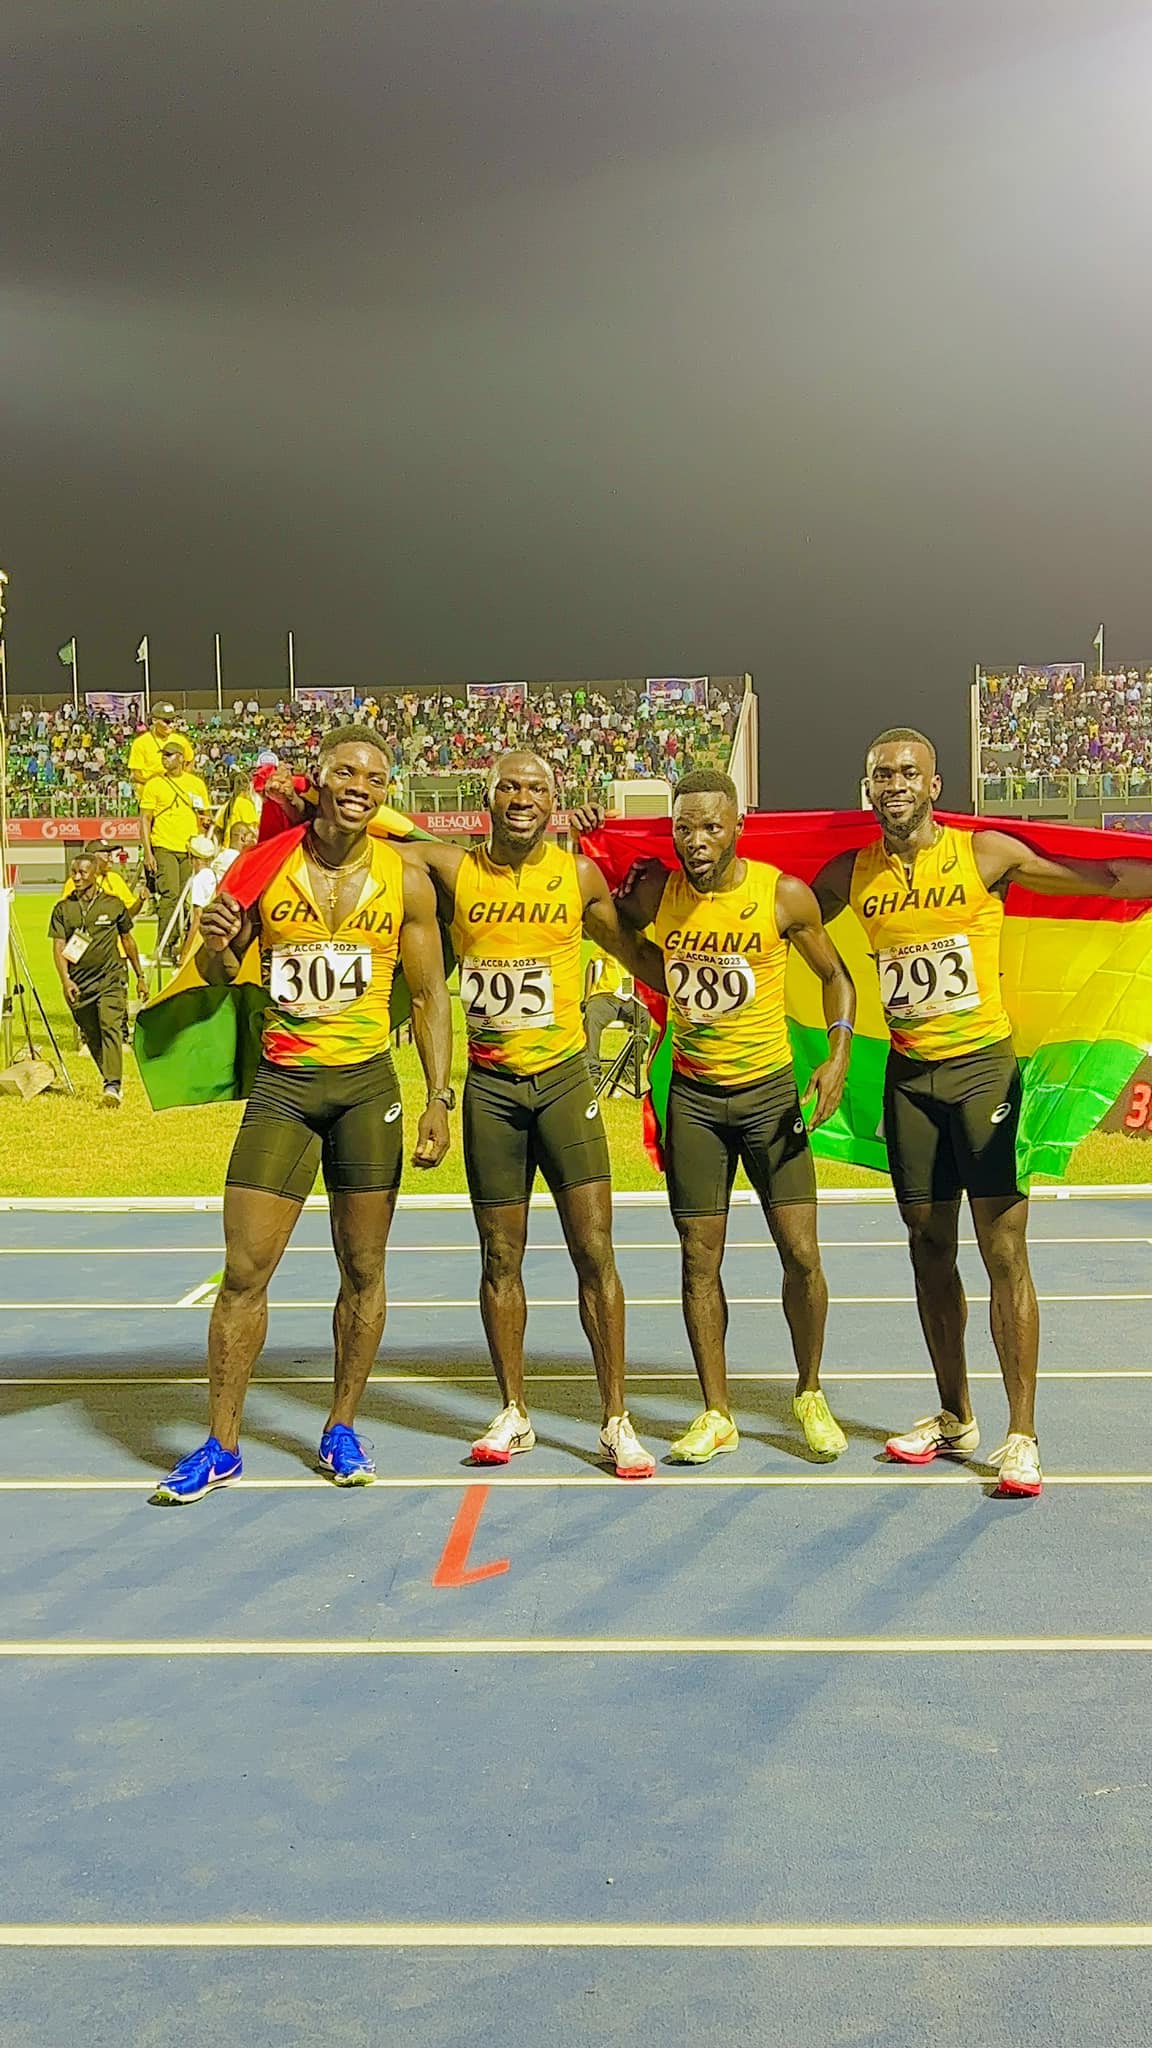 No Ghanaian athlete meets qualification standards for Paris Olympics